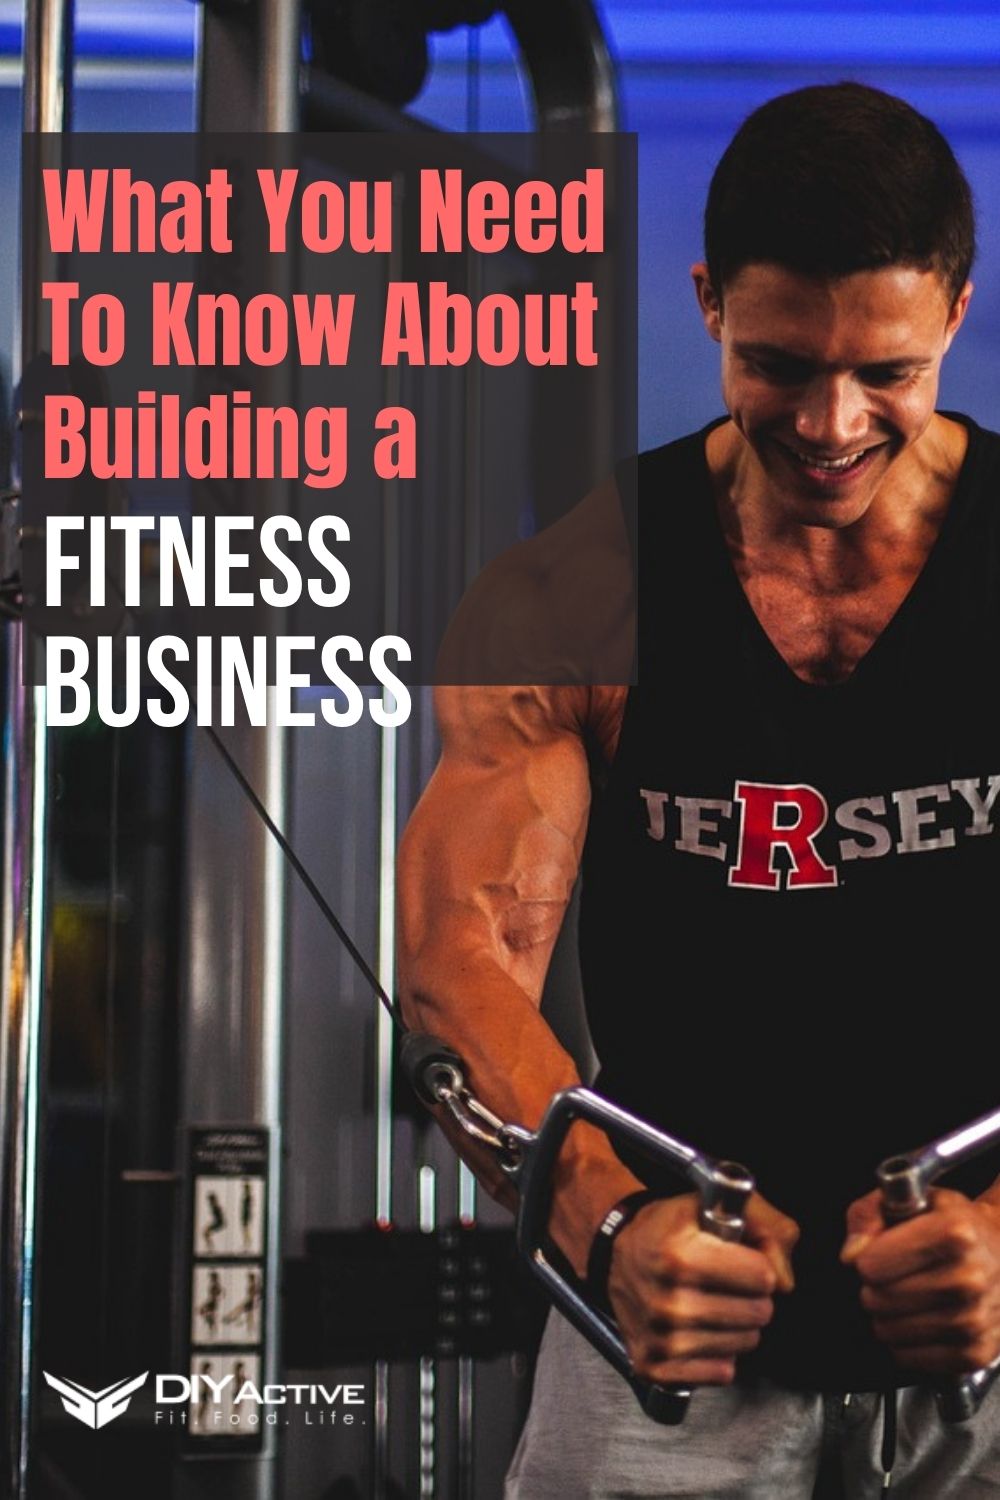 Here\'s What You Need To Know About Building a Fitness Business